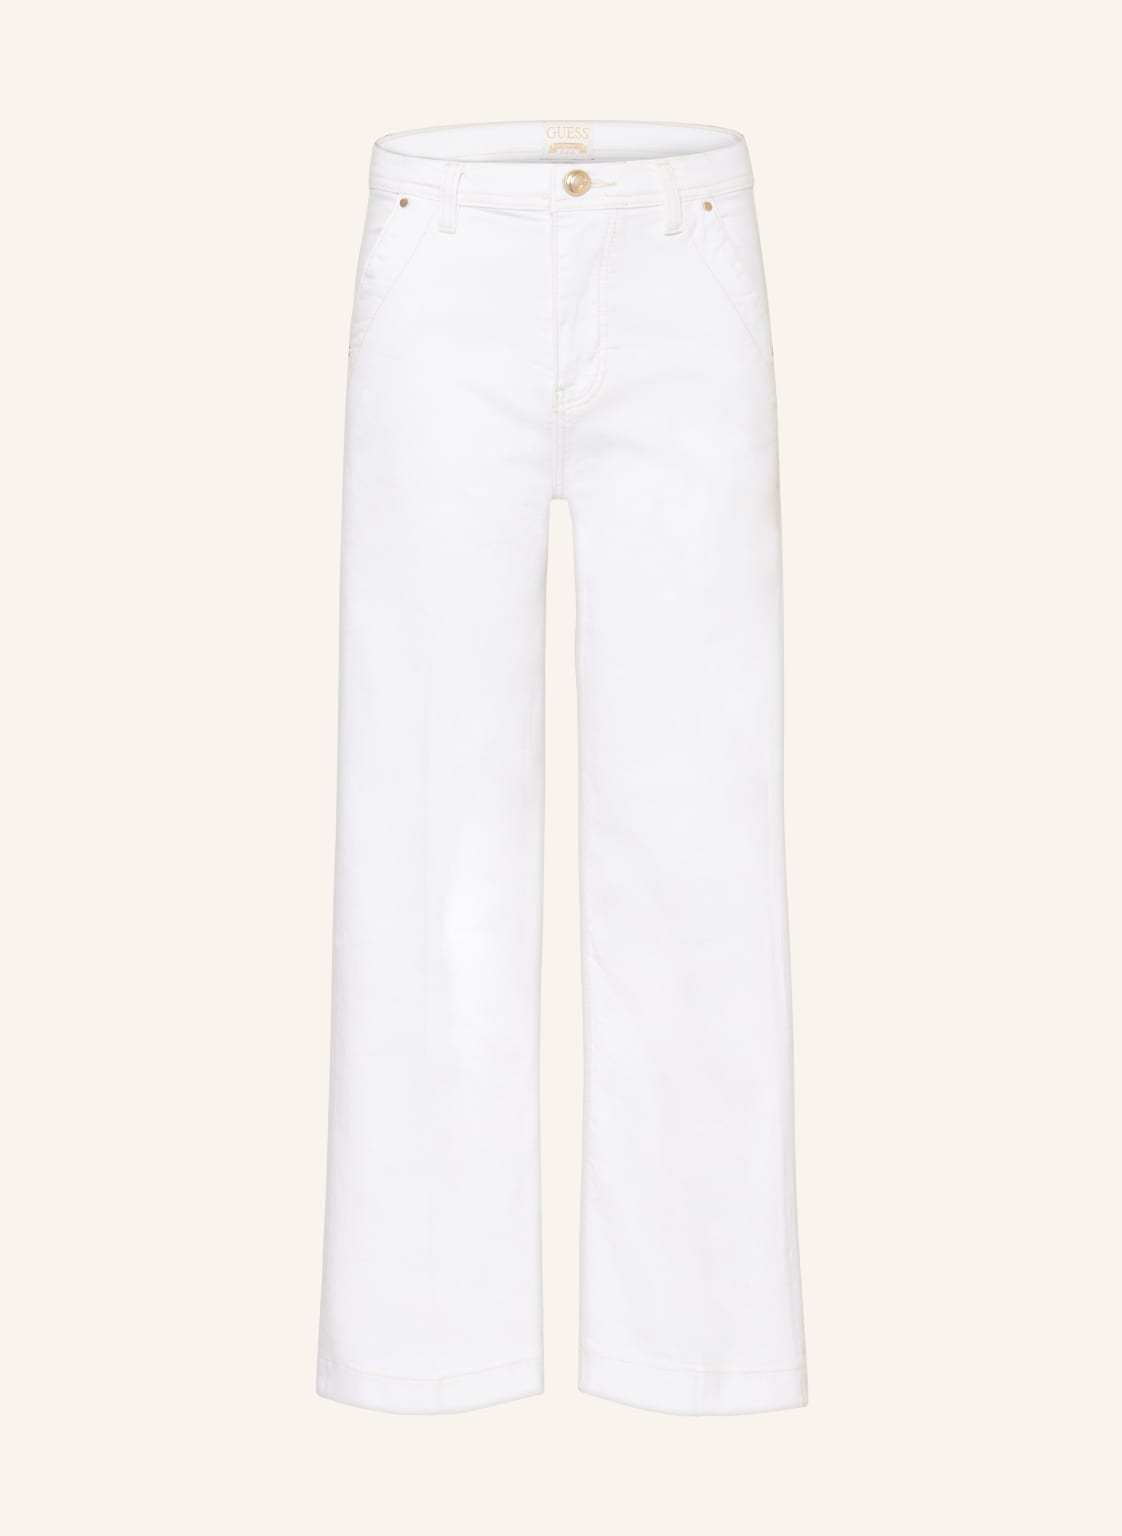 Guess Jeans-Culotte weiss von Guess